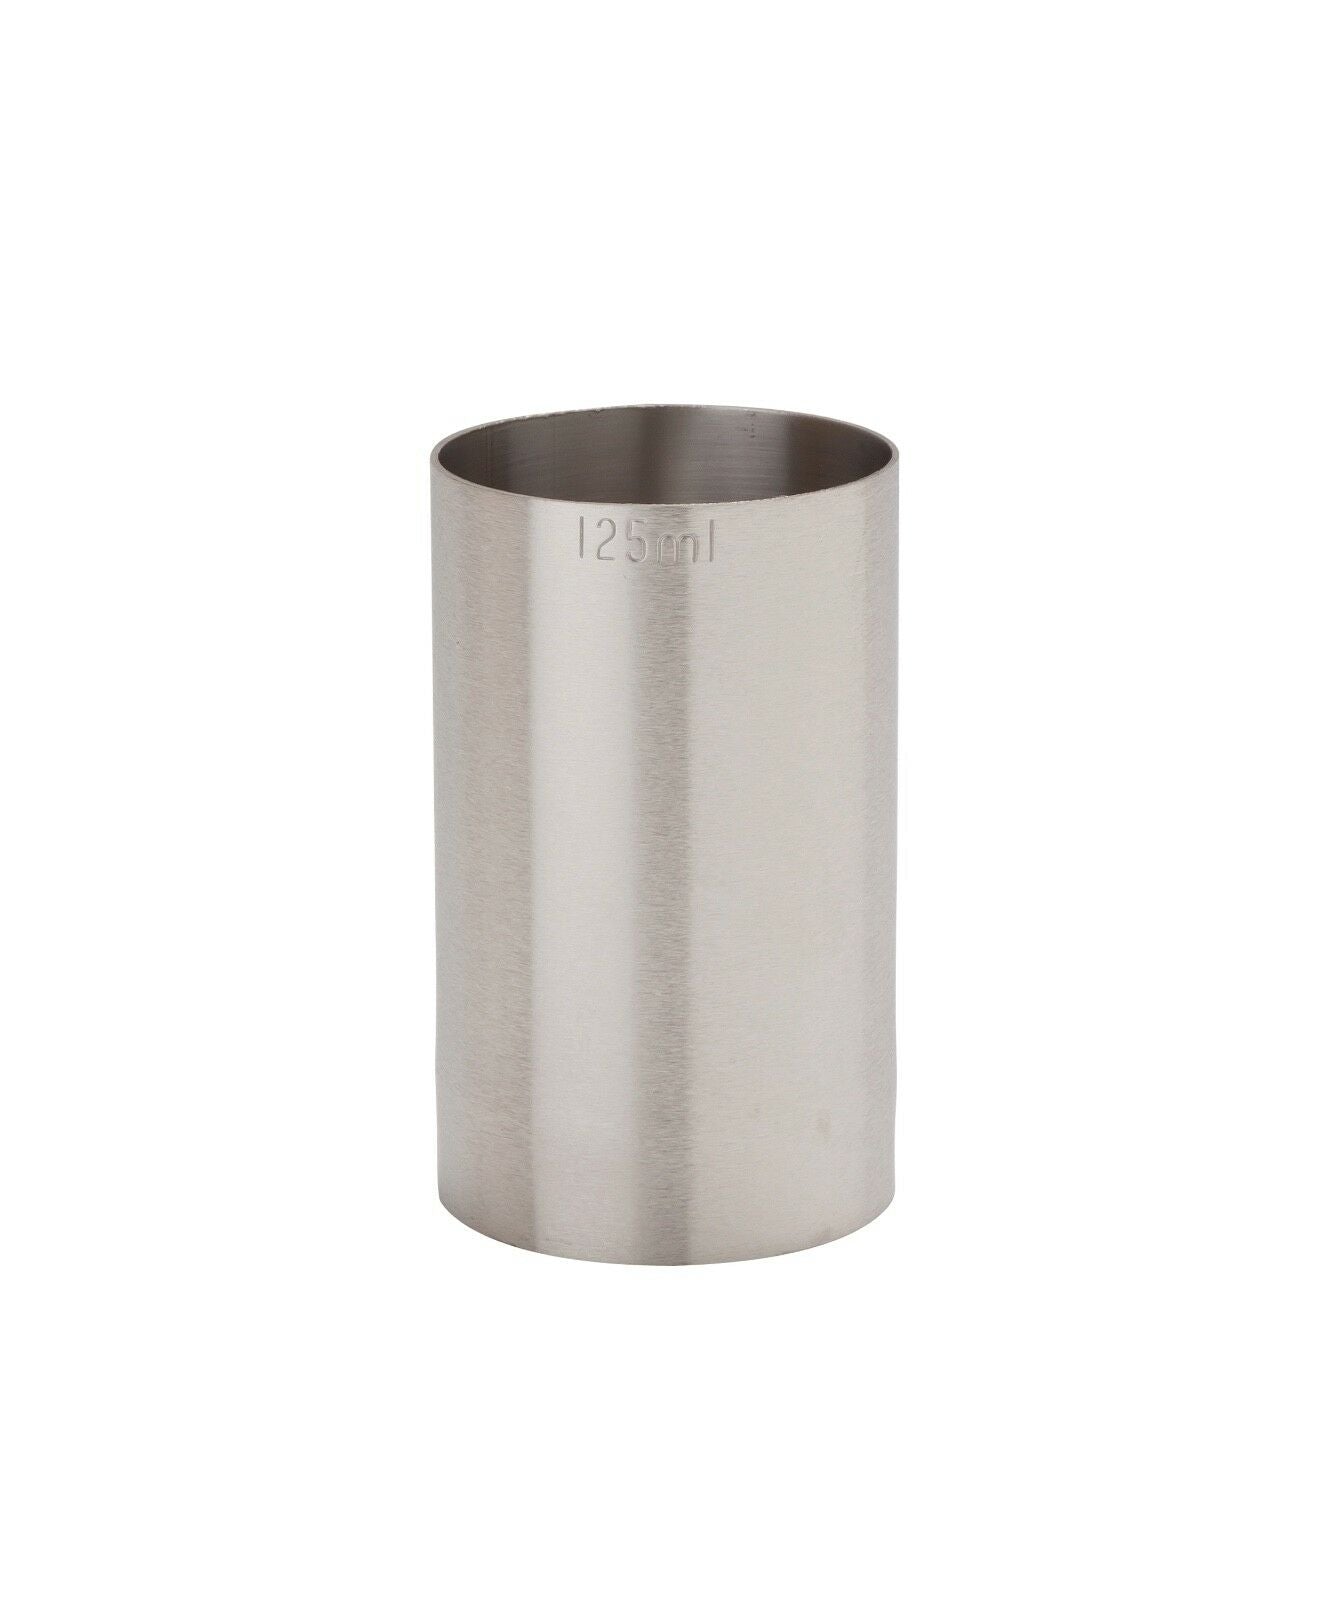 125ml Stainless Steel Thimble Measure CE Stamped